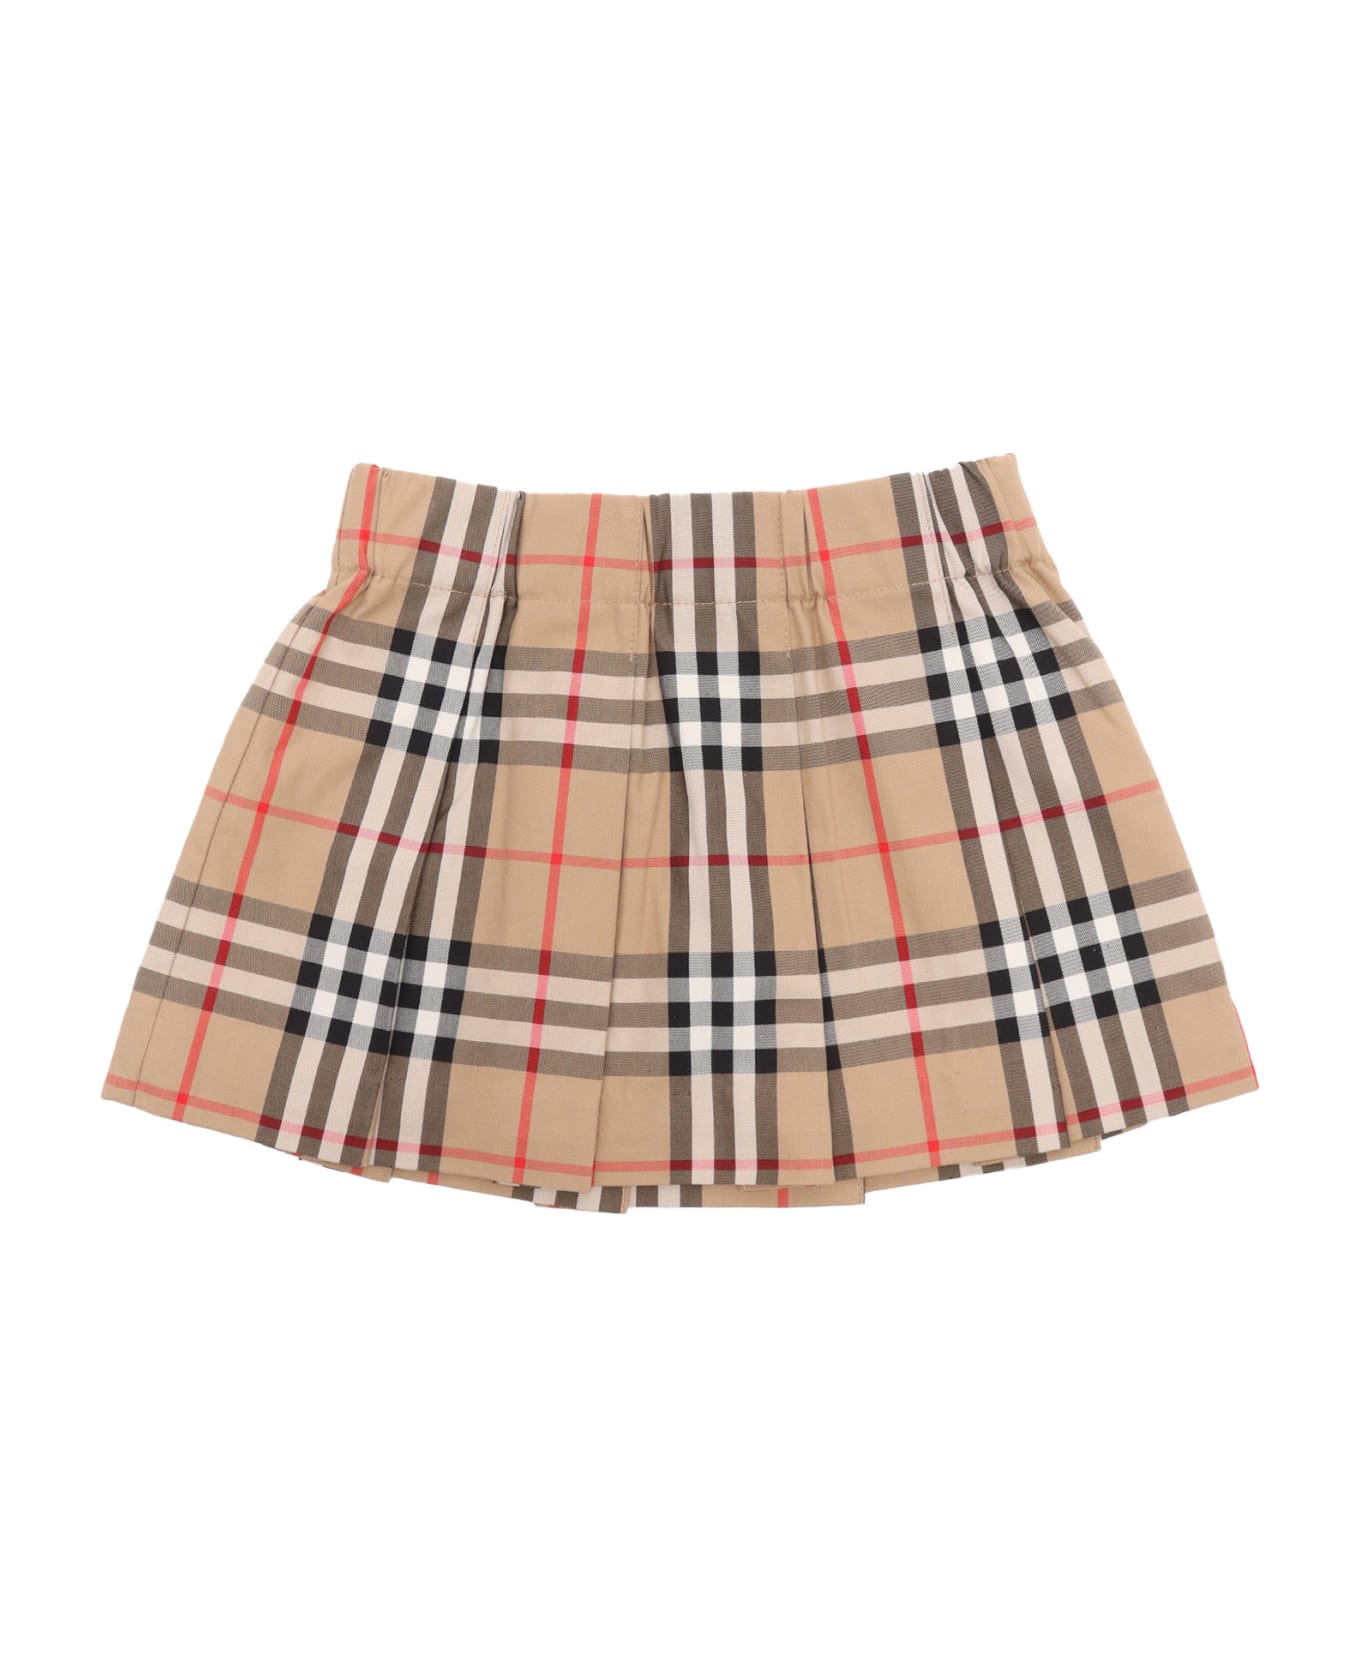 Burberry Check Pattern Skirt - BEIGE ボトムス